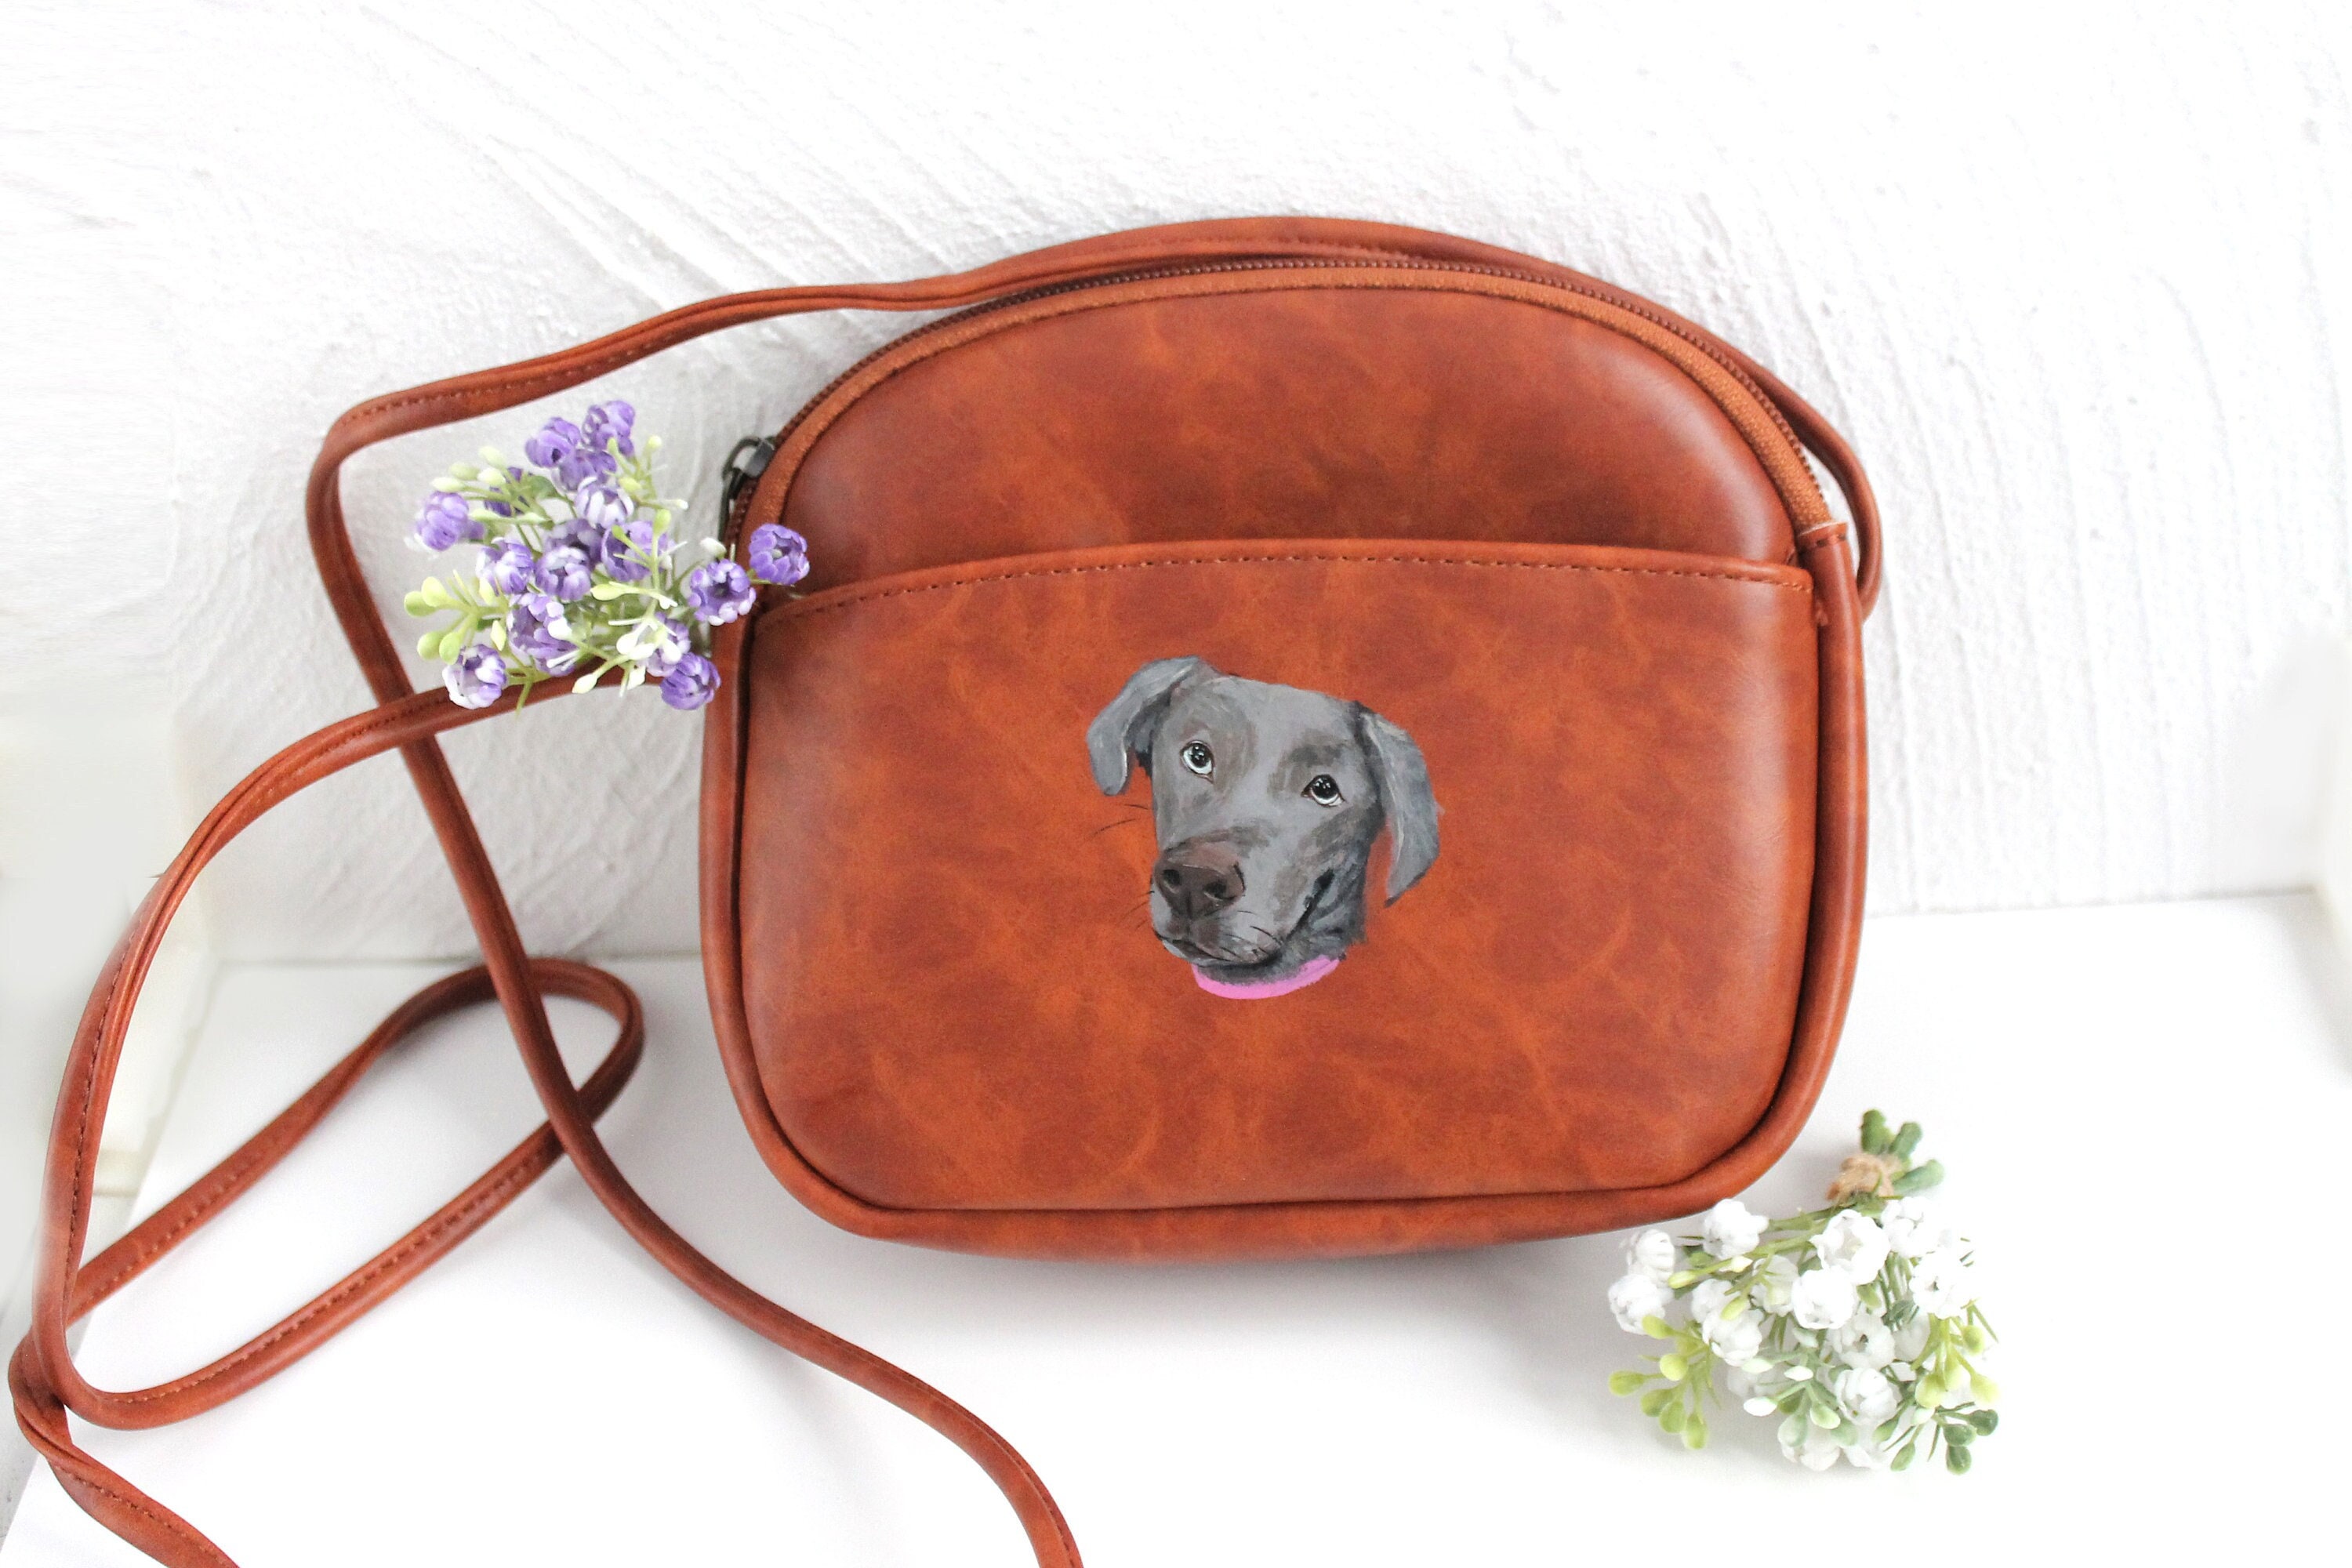 Unconditional Love in A Furry Bag - Dog & Cat Personalized Custom Leather Handbag - Gift for Pet Owners, Pet lovers, with Strap - Pawfect House